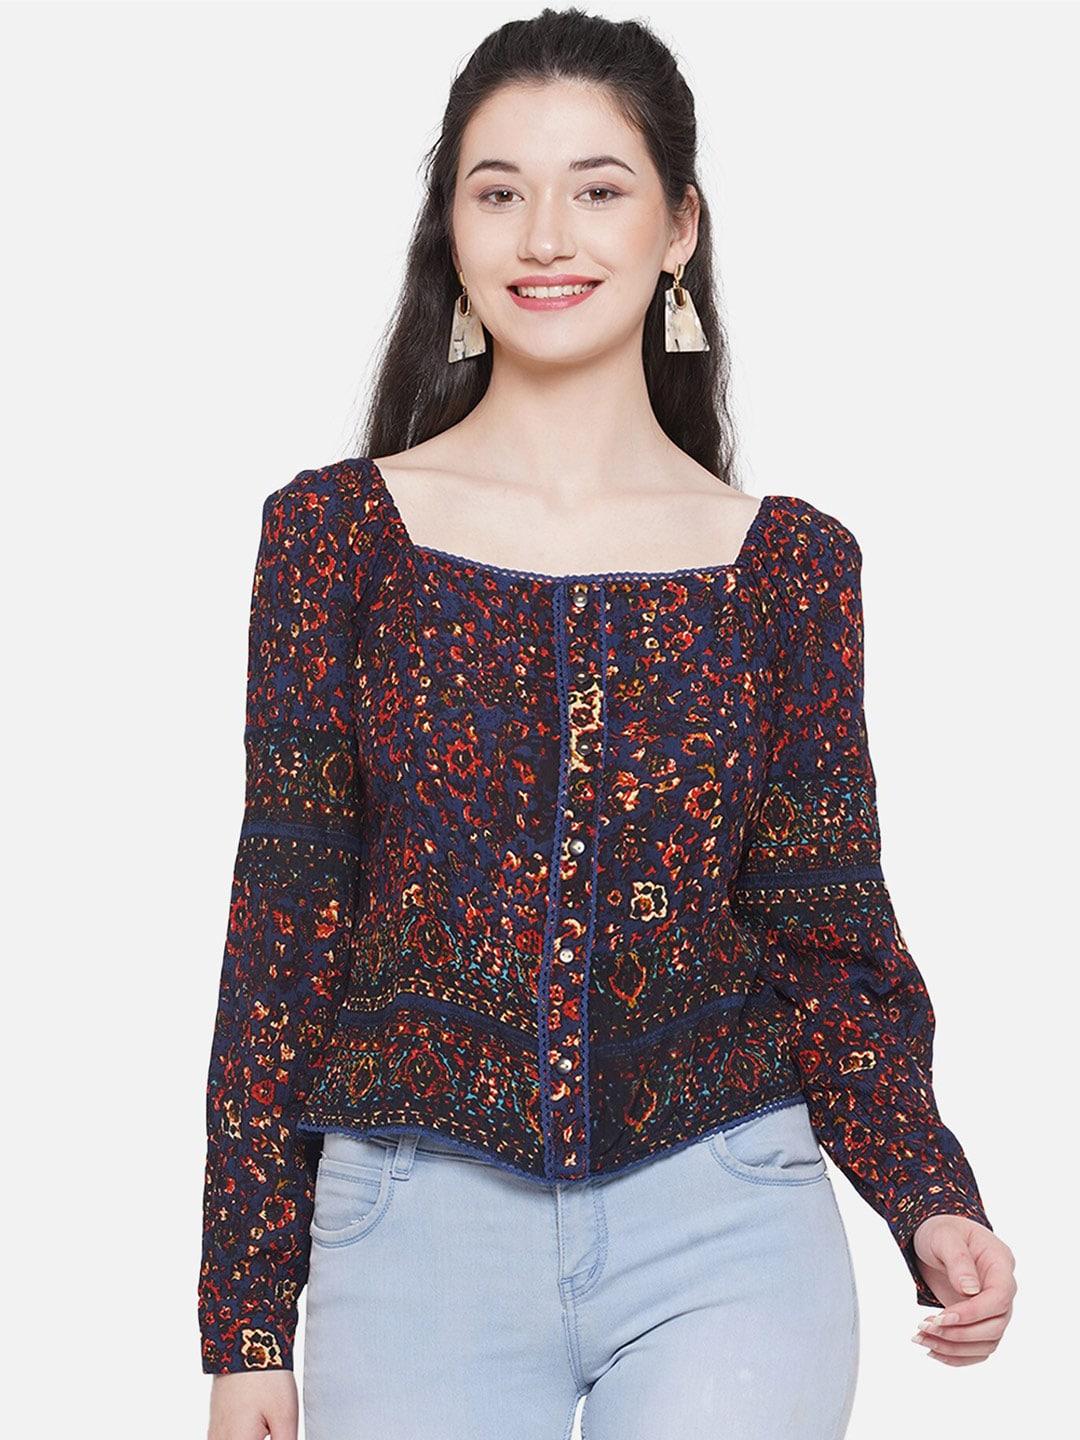 bellamia floral printed square neck cuffed sleeves shirt style top